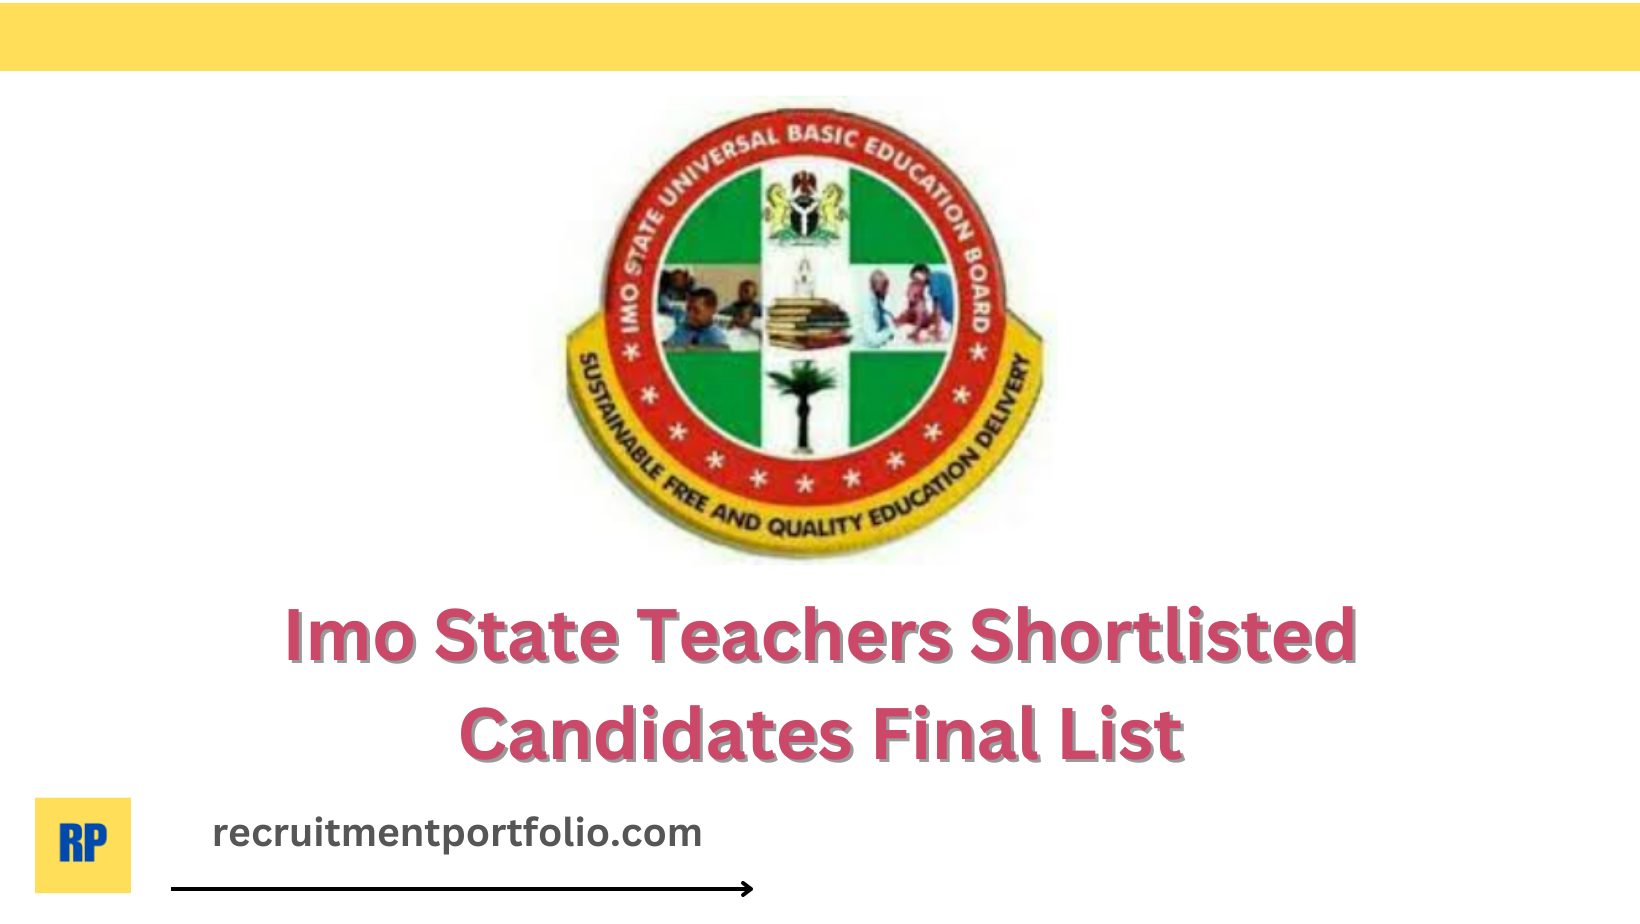 Imo State Teachers Shortlisted